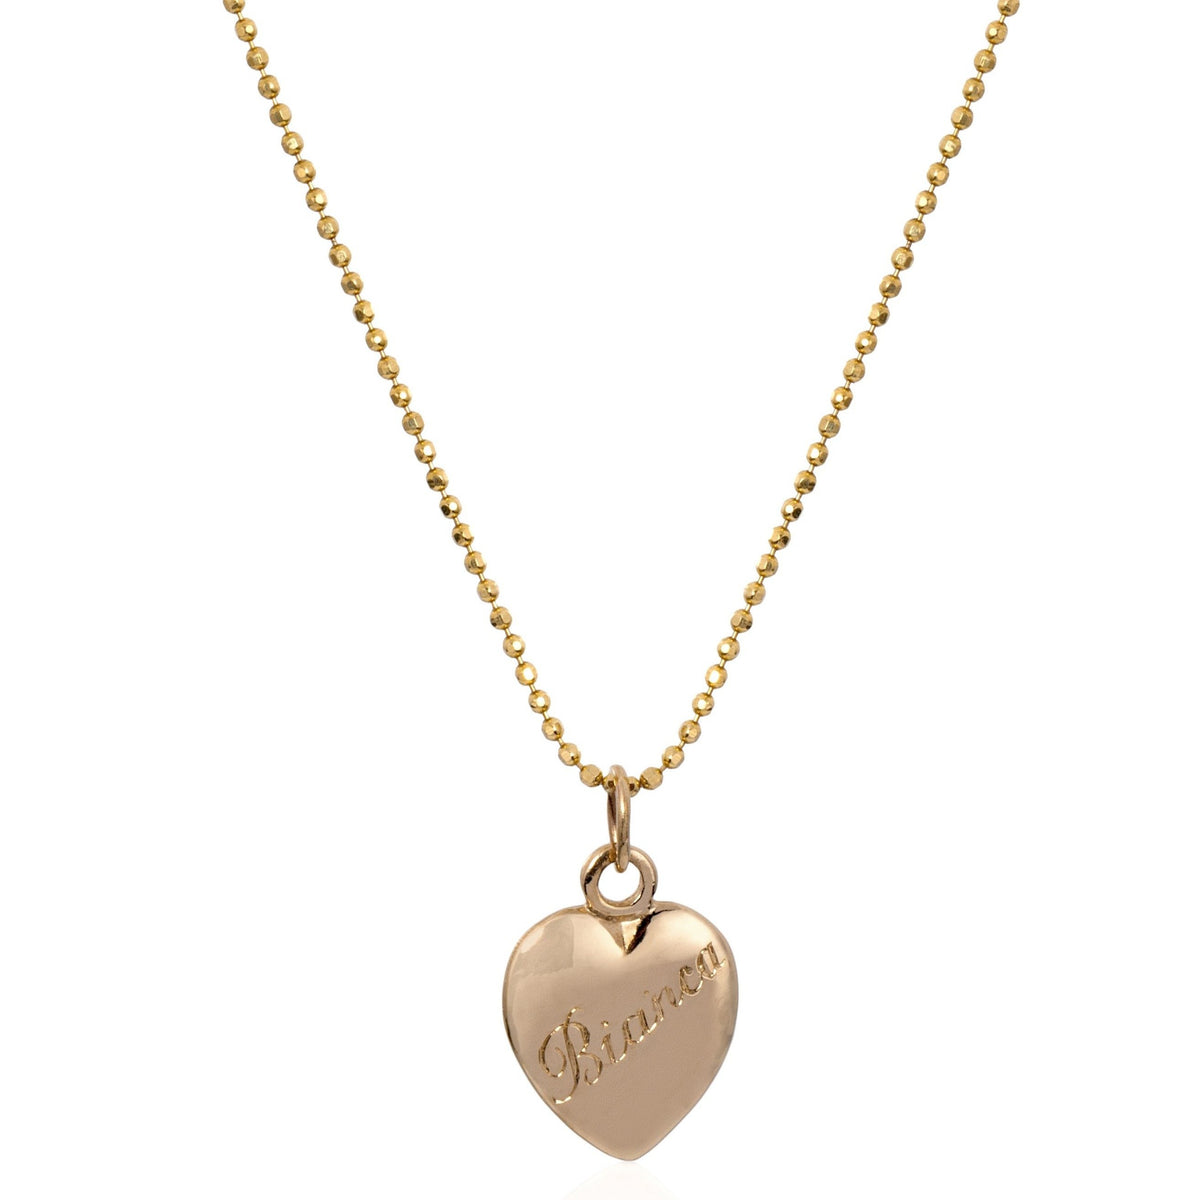 Engraved Heart Infinity Necklace in Gold Plating - MYKA